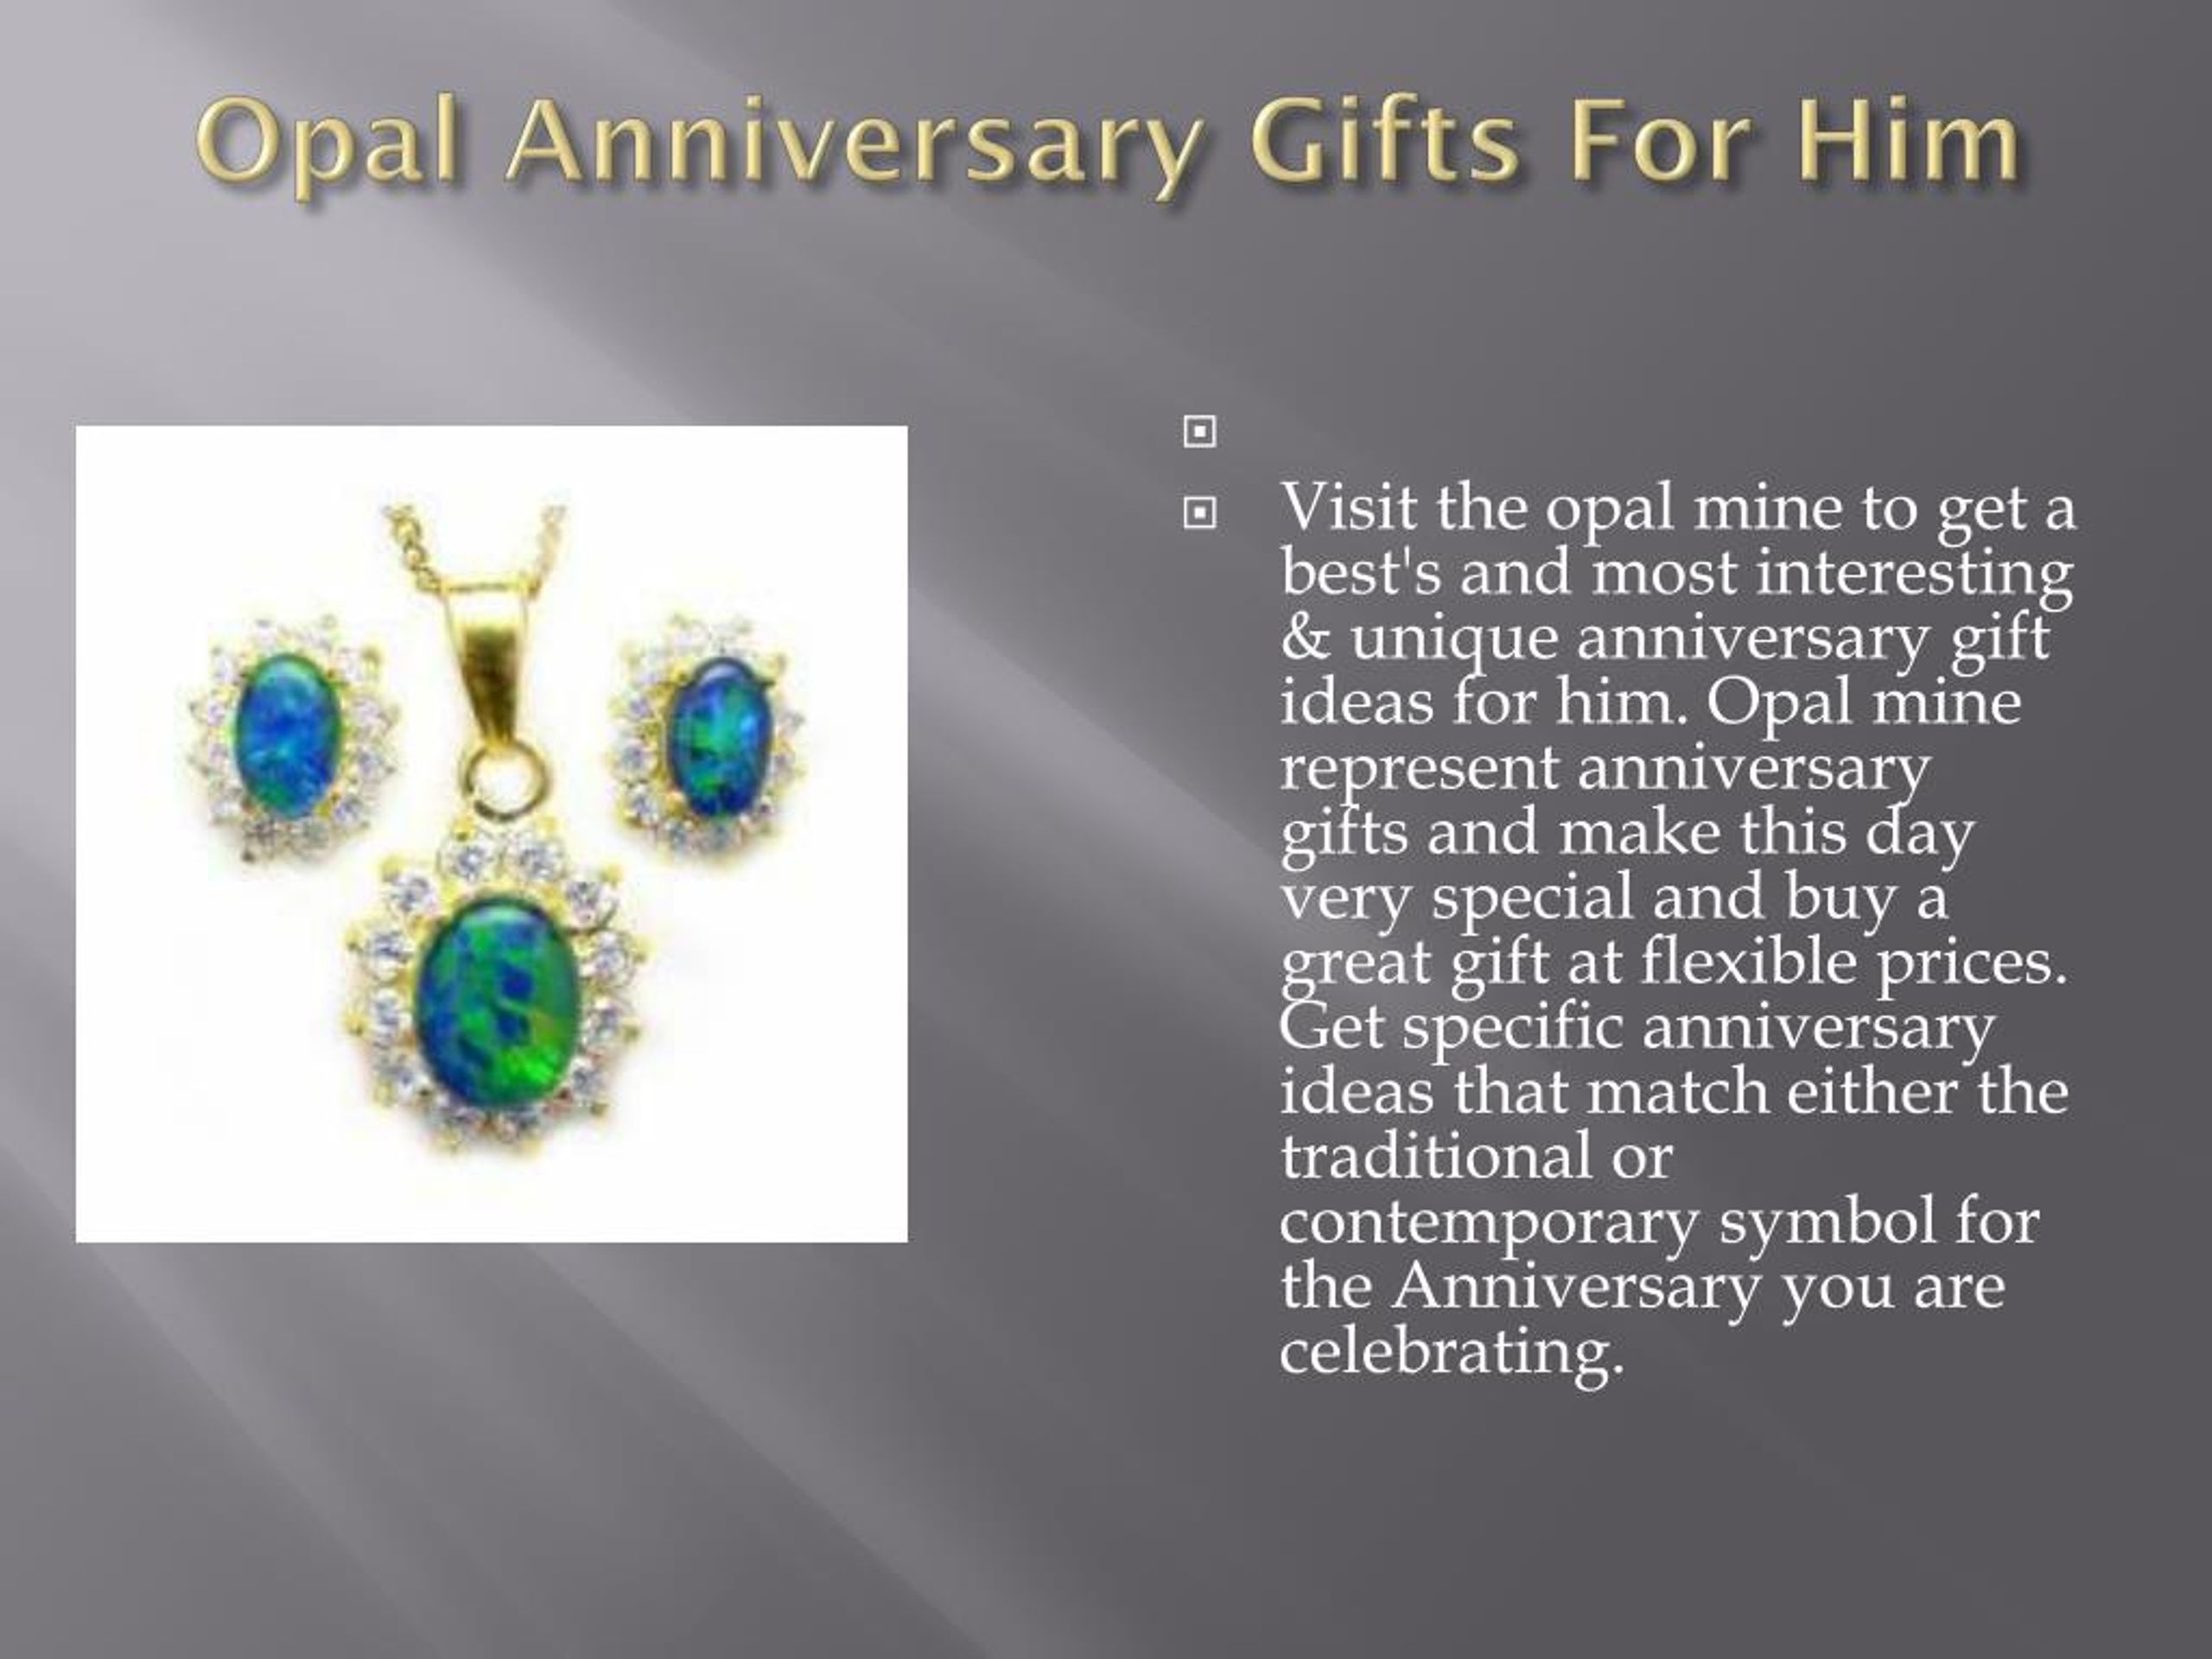 Opal Gifts PowerPoint Presentation